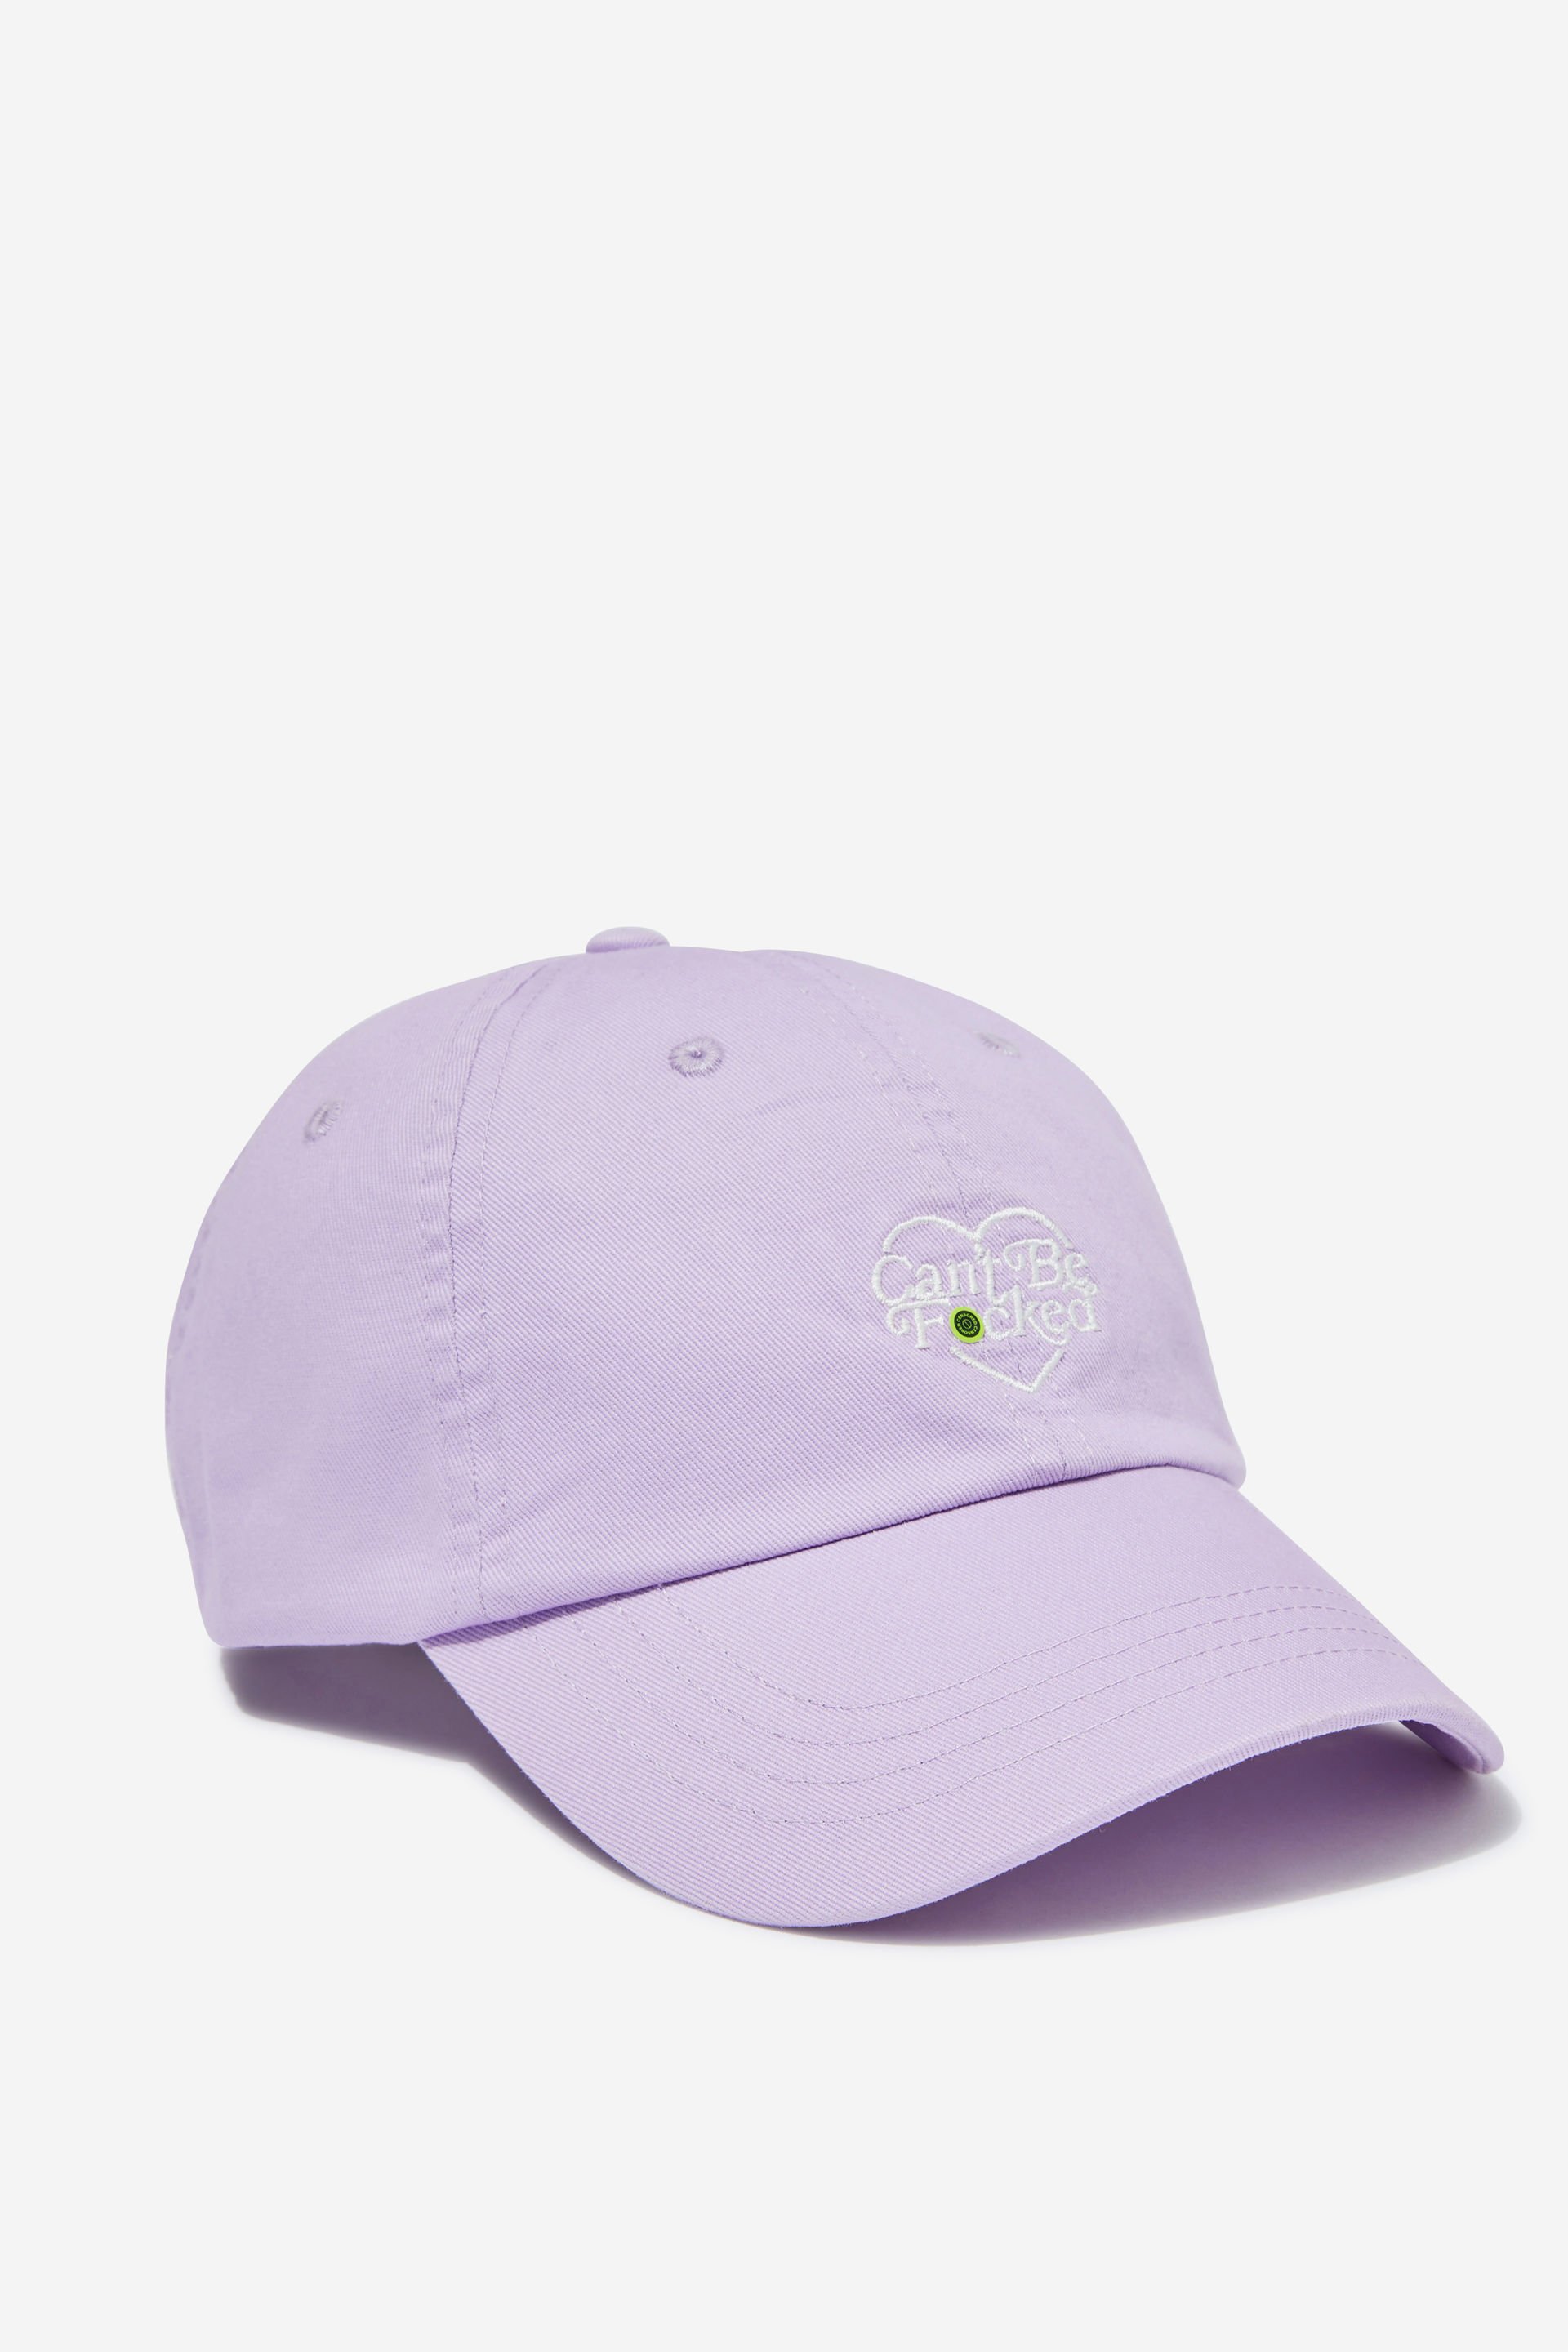 Typo - Just Another Dad Cap - Lilac cbf heart!!